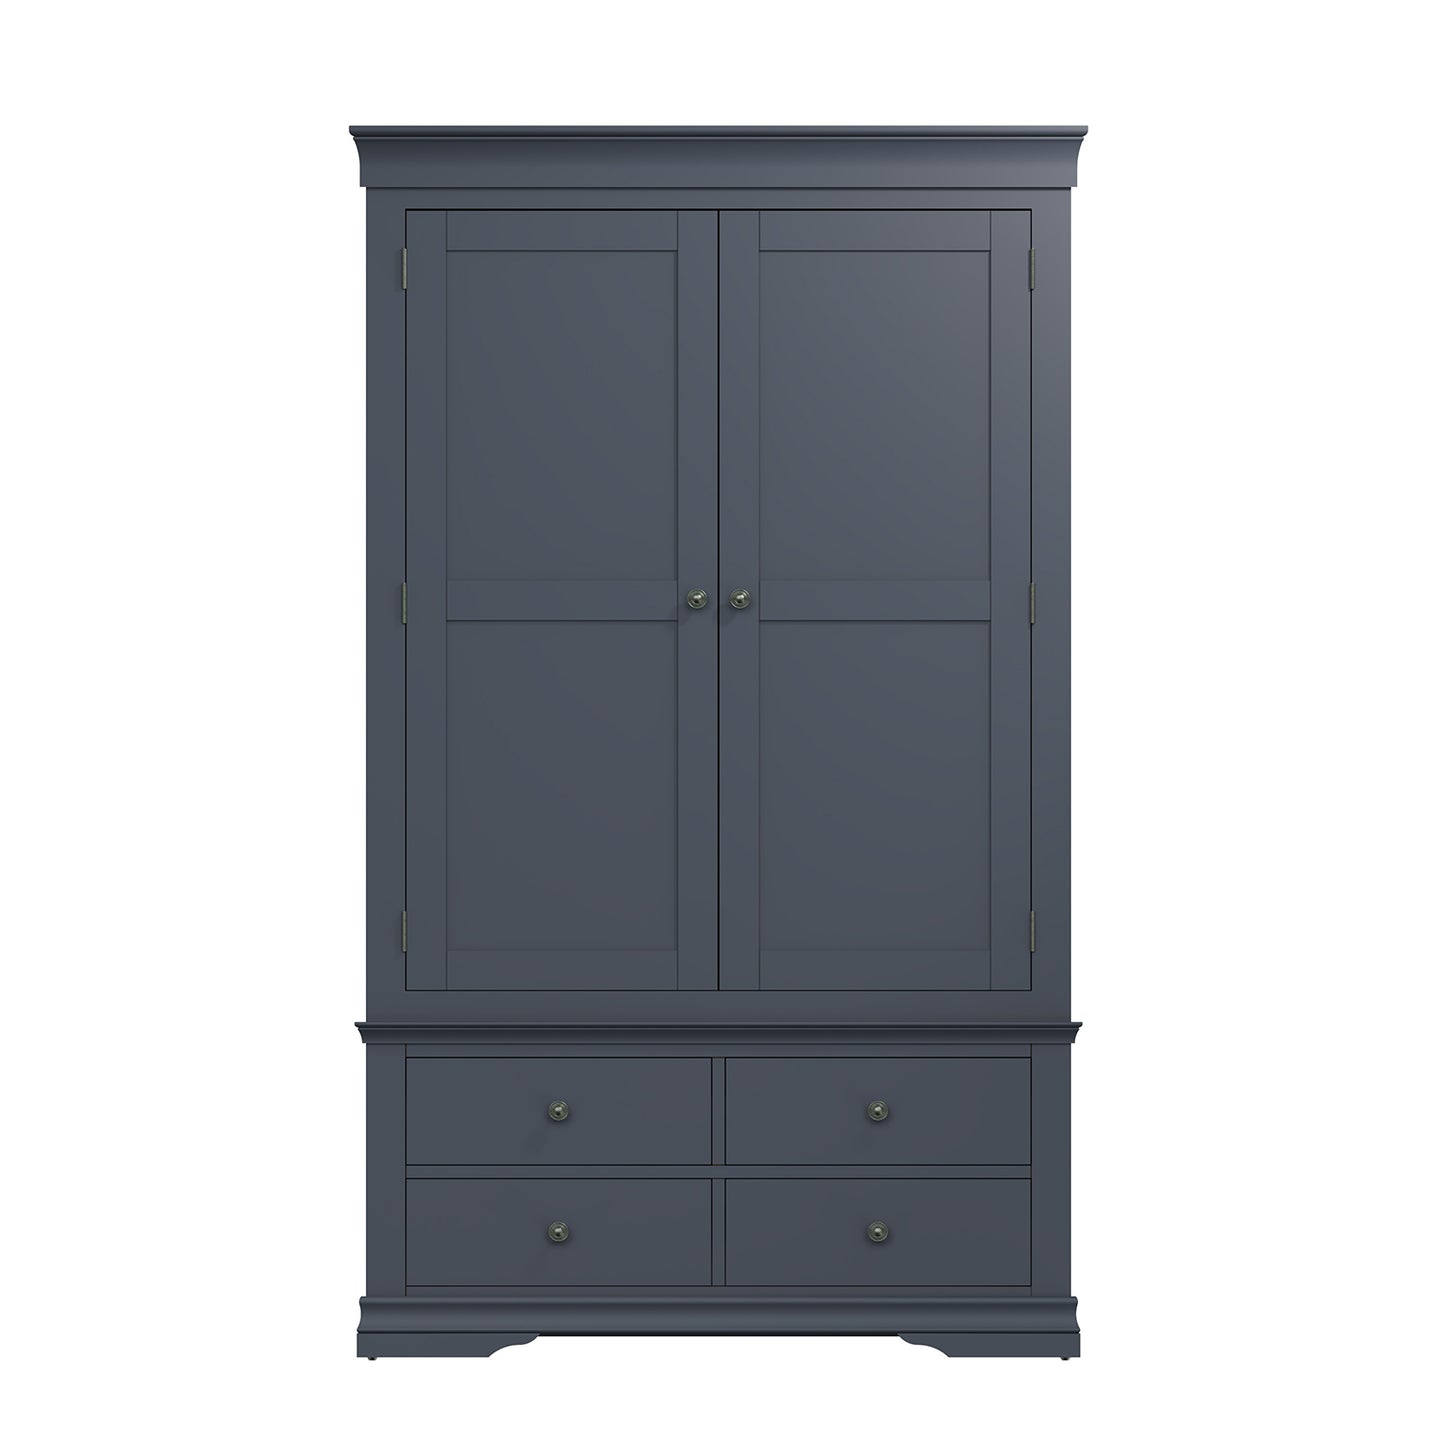 Toulouse Midnight Grey Wardrobe - 2 Door With Drawers